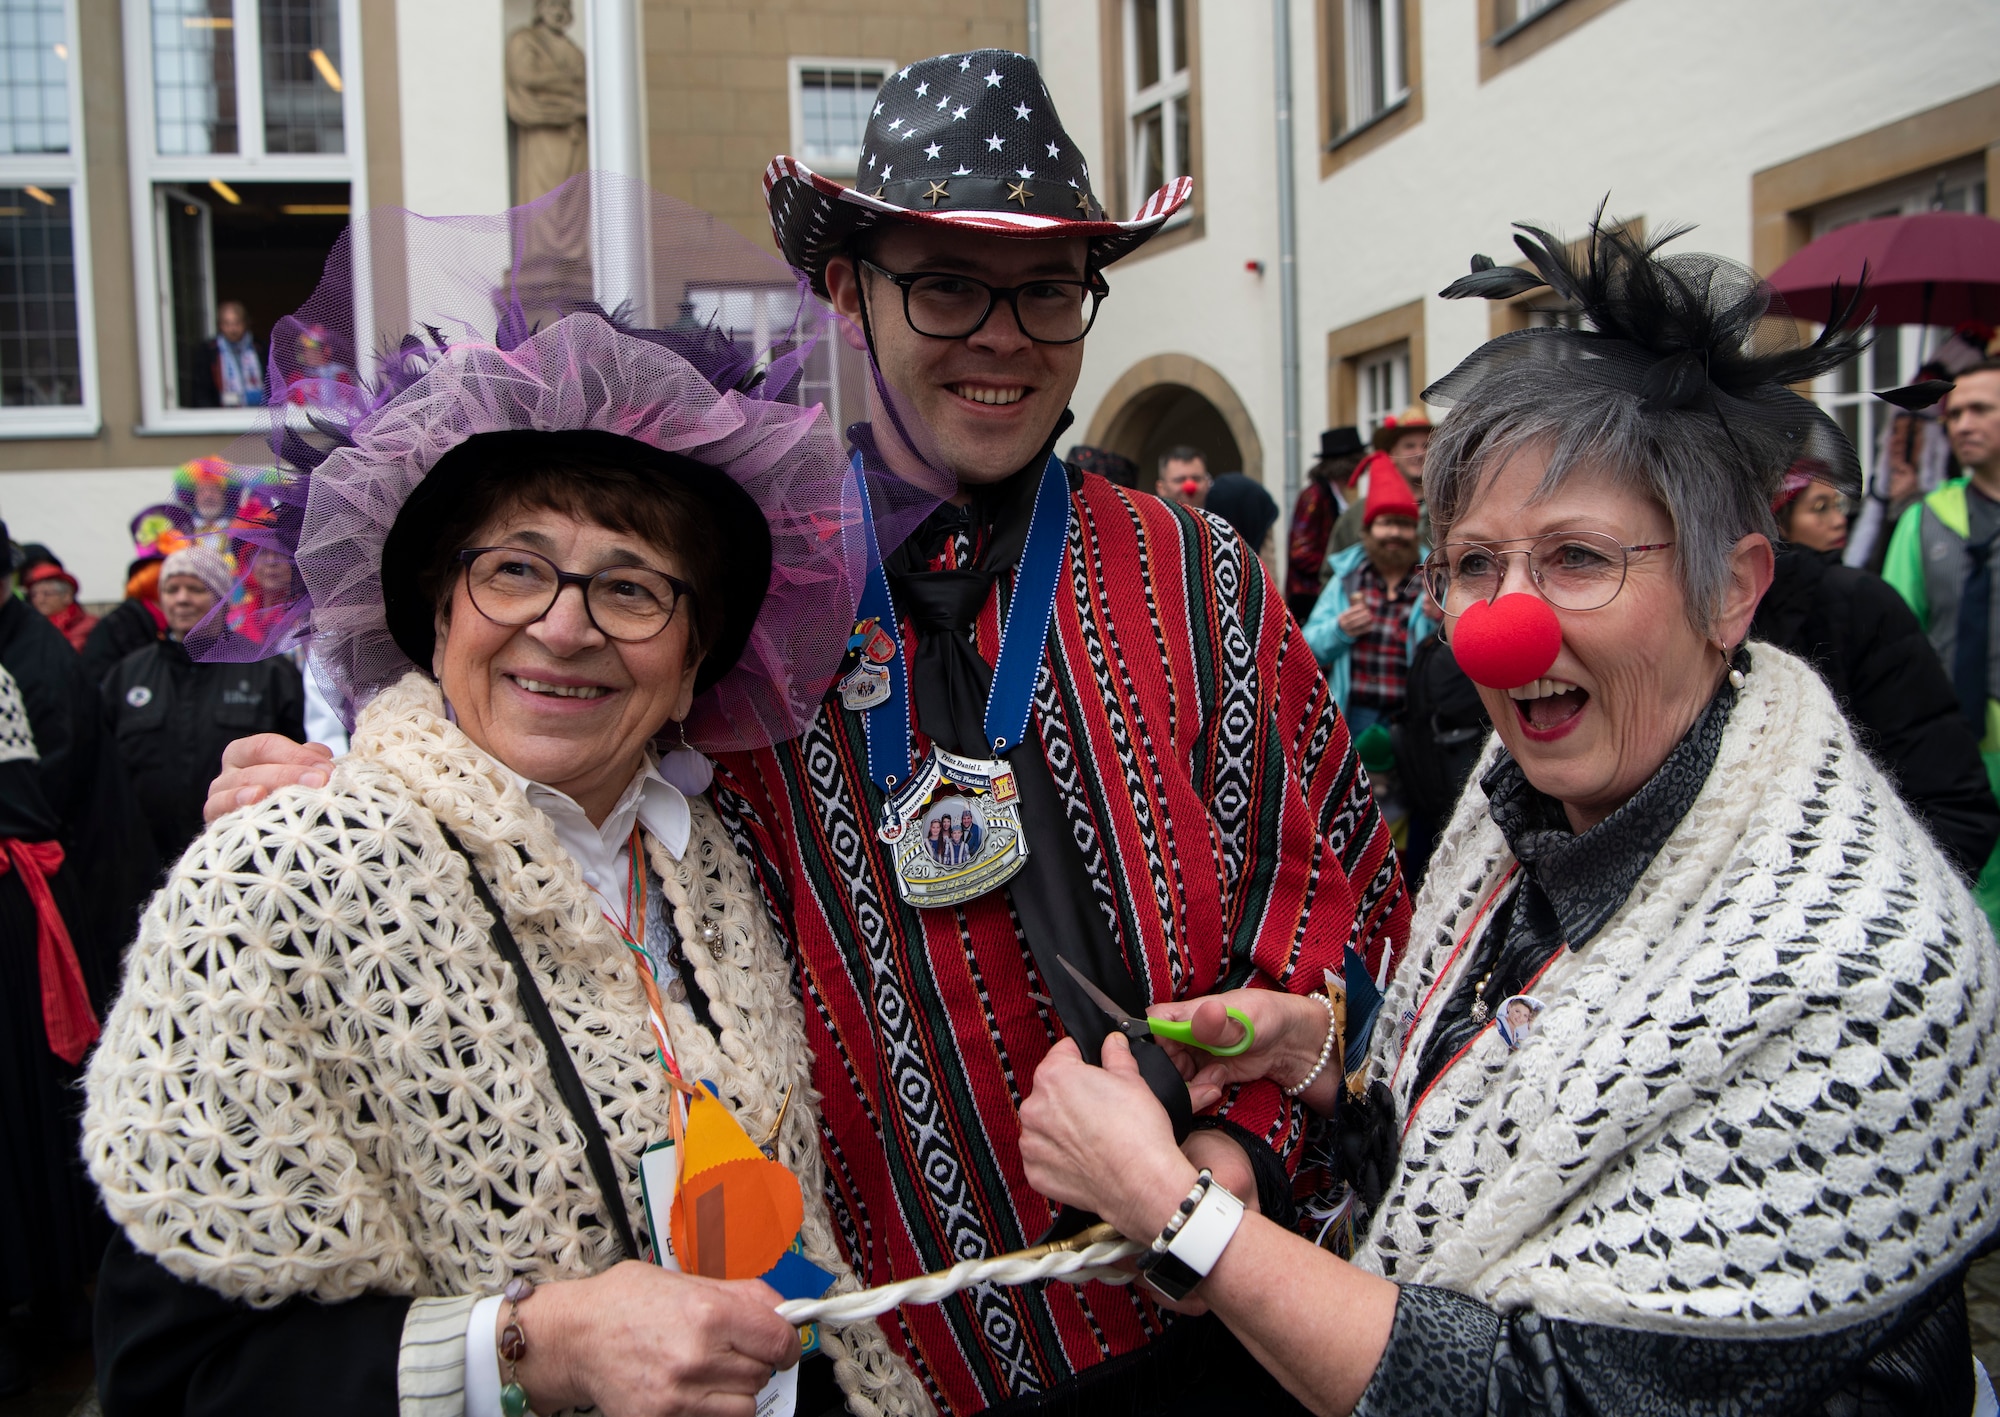 Bitburg residents celebrate Fasching with Saber Nation